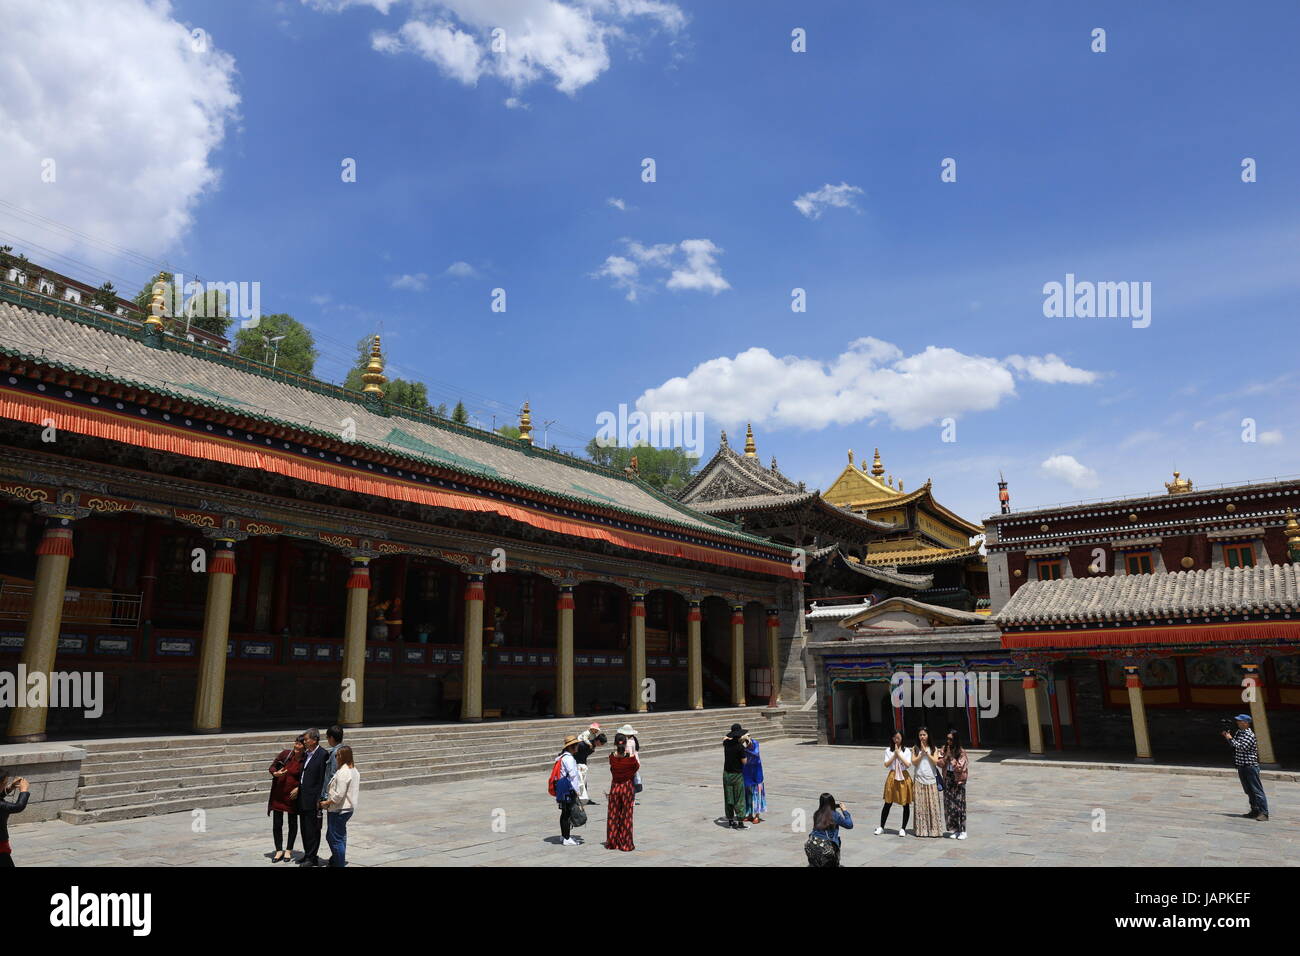 Xining, Xining, China. 7th June, 2017. Xining, CHINA-June 7 2017: (EDITORIAL USE ONLY. CHINA OUT) .The Tar Monastery, one of the six most important monasteries of the Gelukpa (Yellow Hat) school of Tibetan Buddhism, is a large complex featuring dozens of halls and towers on a mountainside in both Tibetan and Han architectural styles. Located in Huangzhong County, 25 kilometers from Xining, northwest China's Qinghai Province, the monastery was built in 1560 in honor of the founder of Gelukpa School, Tsongkhapa. It's known for its many butter sculptures, mural paintings and barbolas which fully Stock Photo